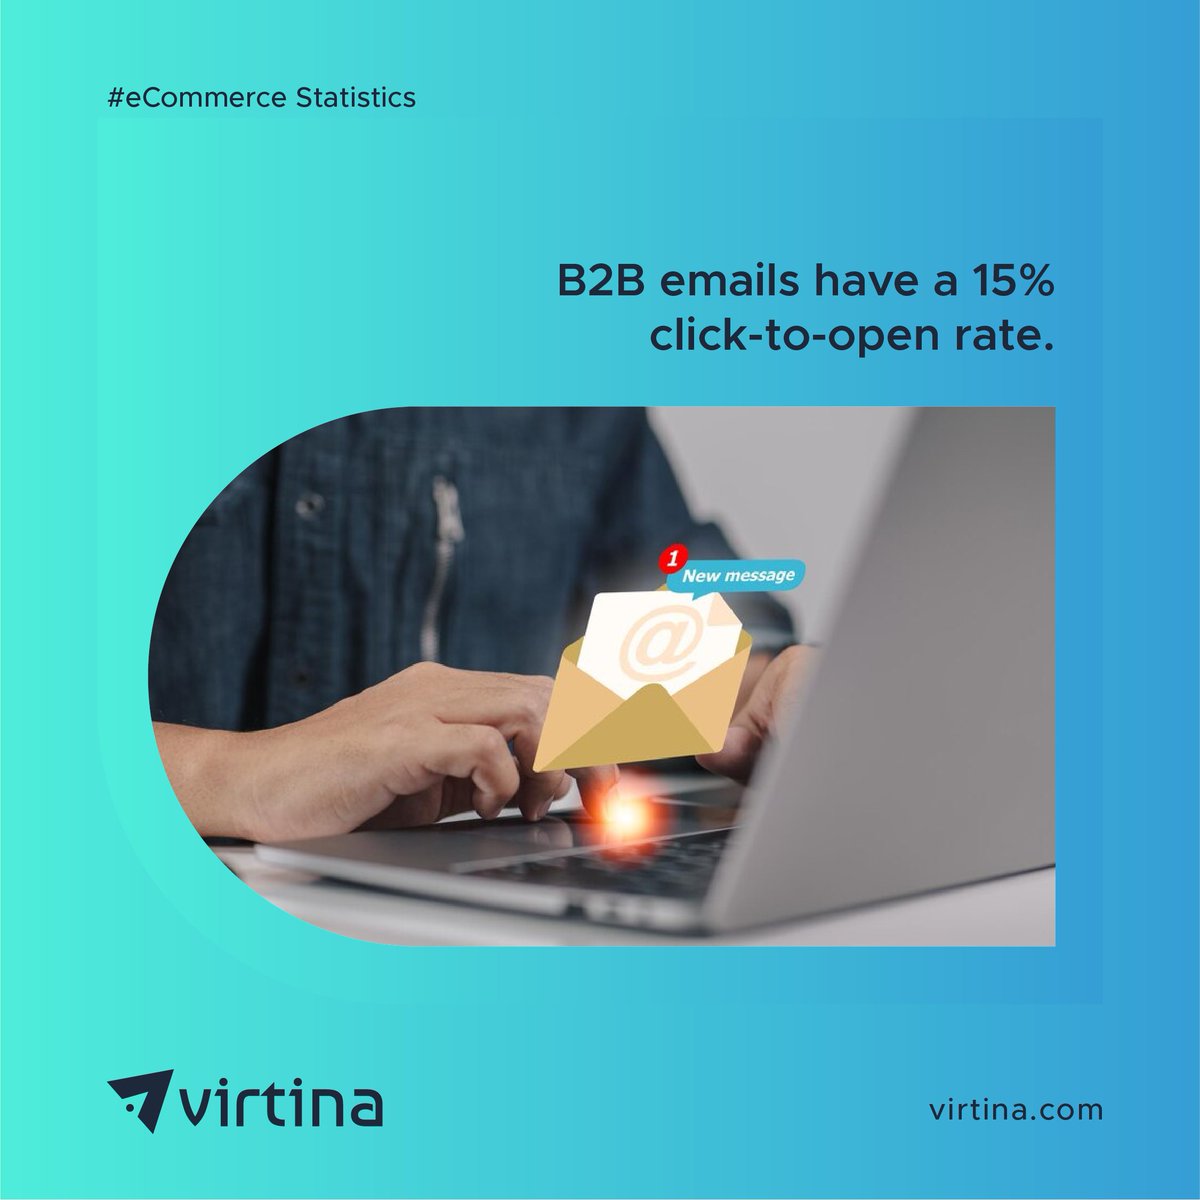 B2B emails aim for a 15% click-to-open rate, a sign of effective content. To boost it, make emails valuable, on-brand, and reader-friendly. Highlight key points, images, and the call-to-action. #B2B #EmailMarketing #ClickToOpenRate